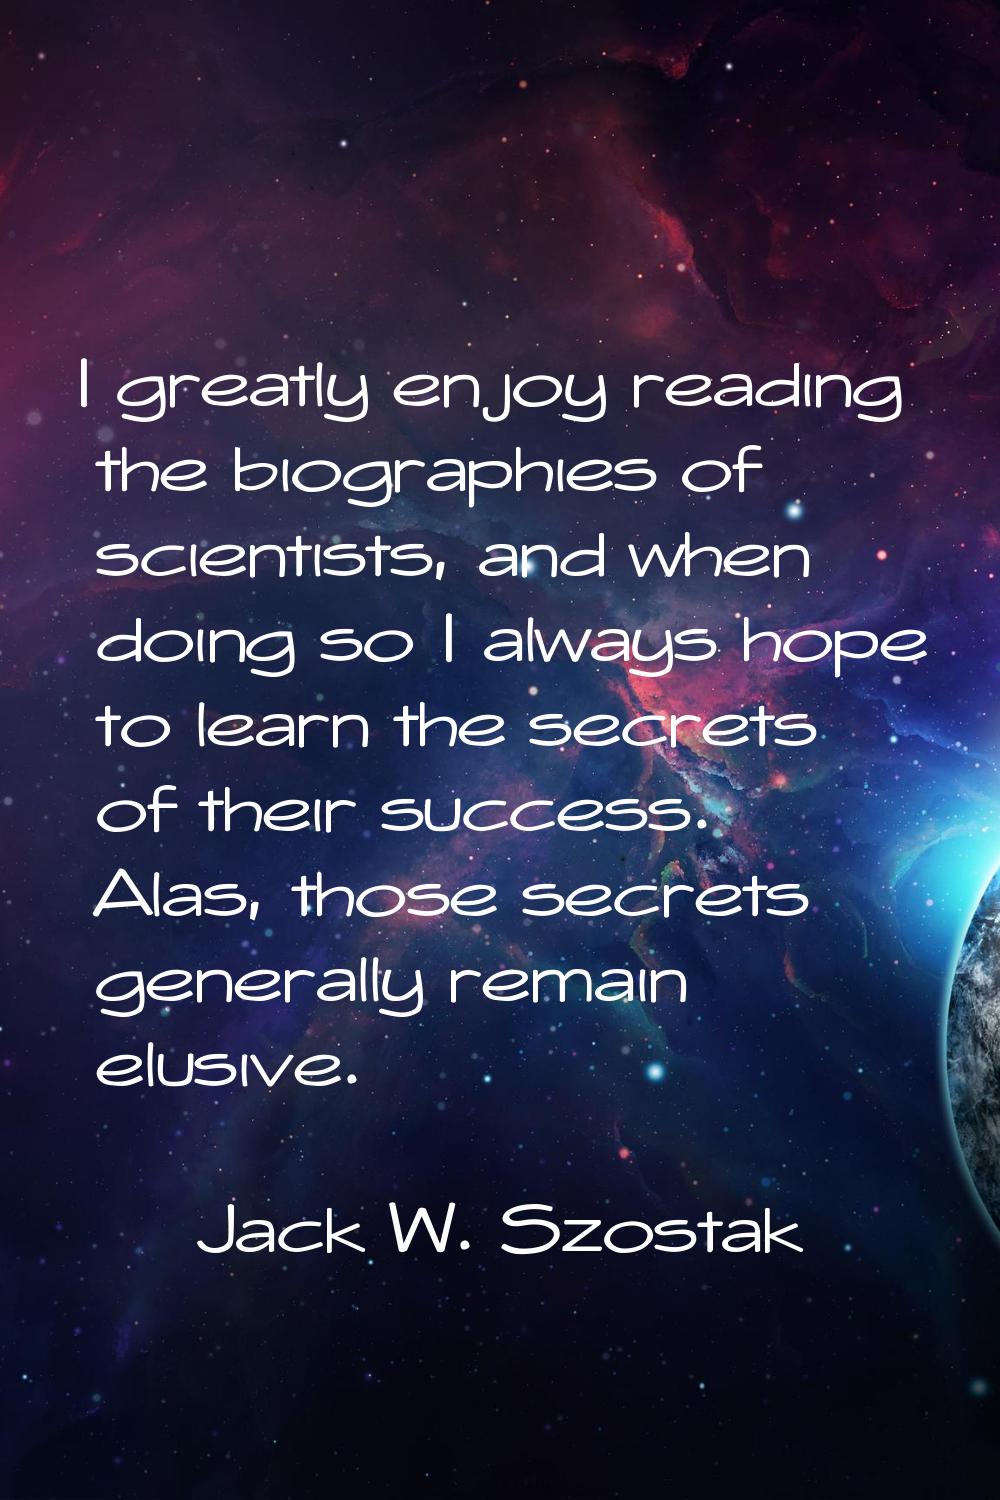 I greatly enjoy reading the biographies of scientists, and when doing so I always hope to learn the